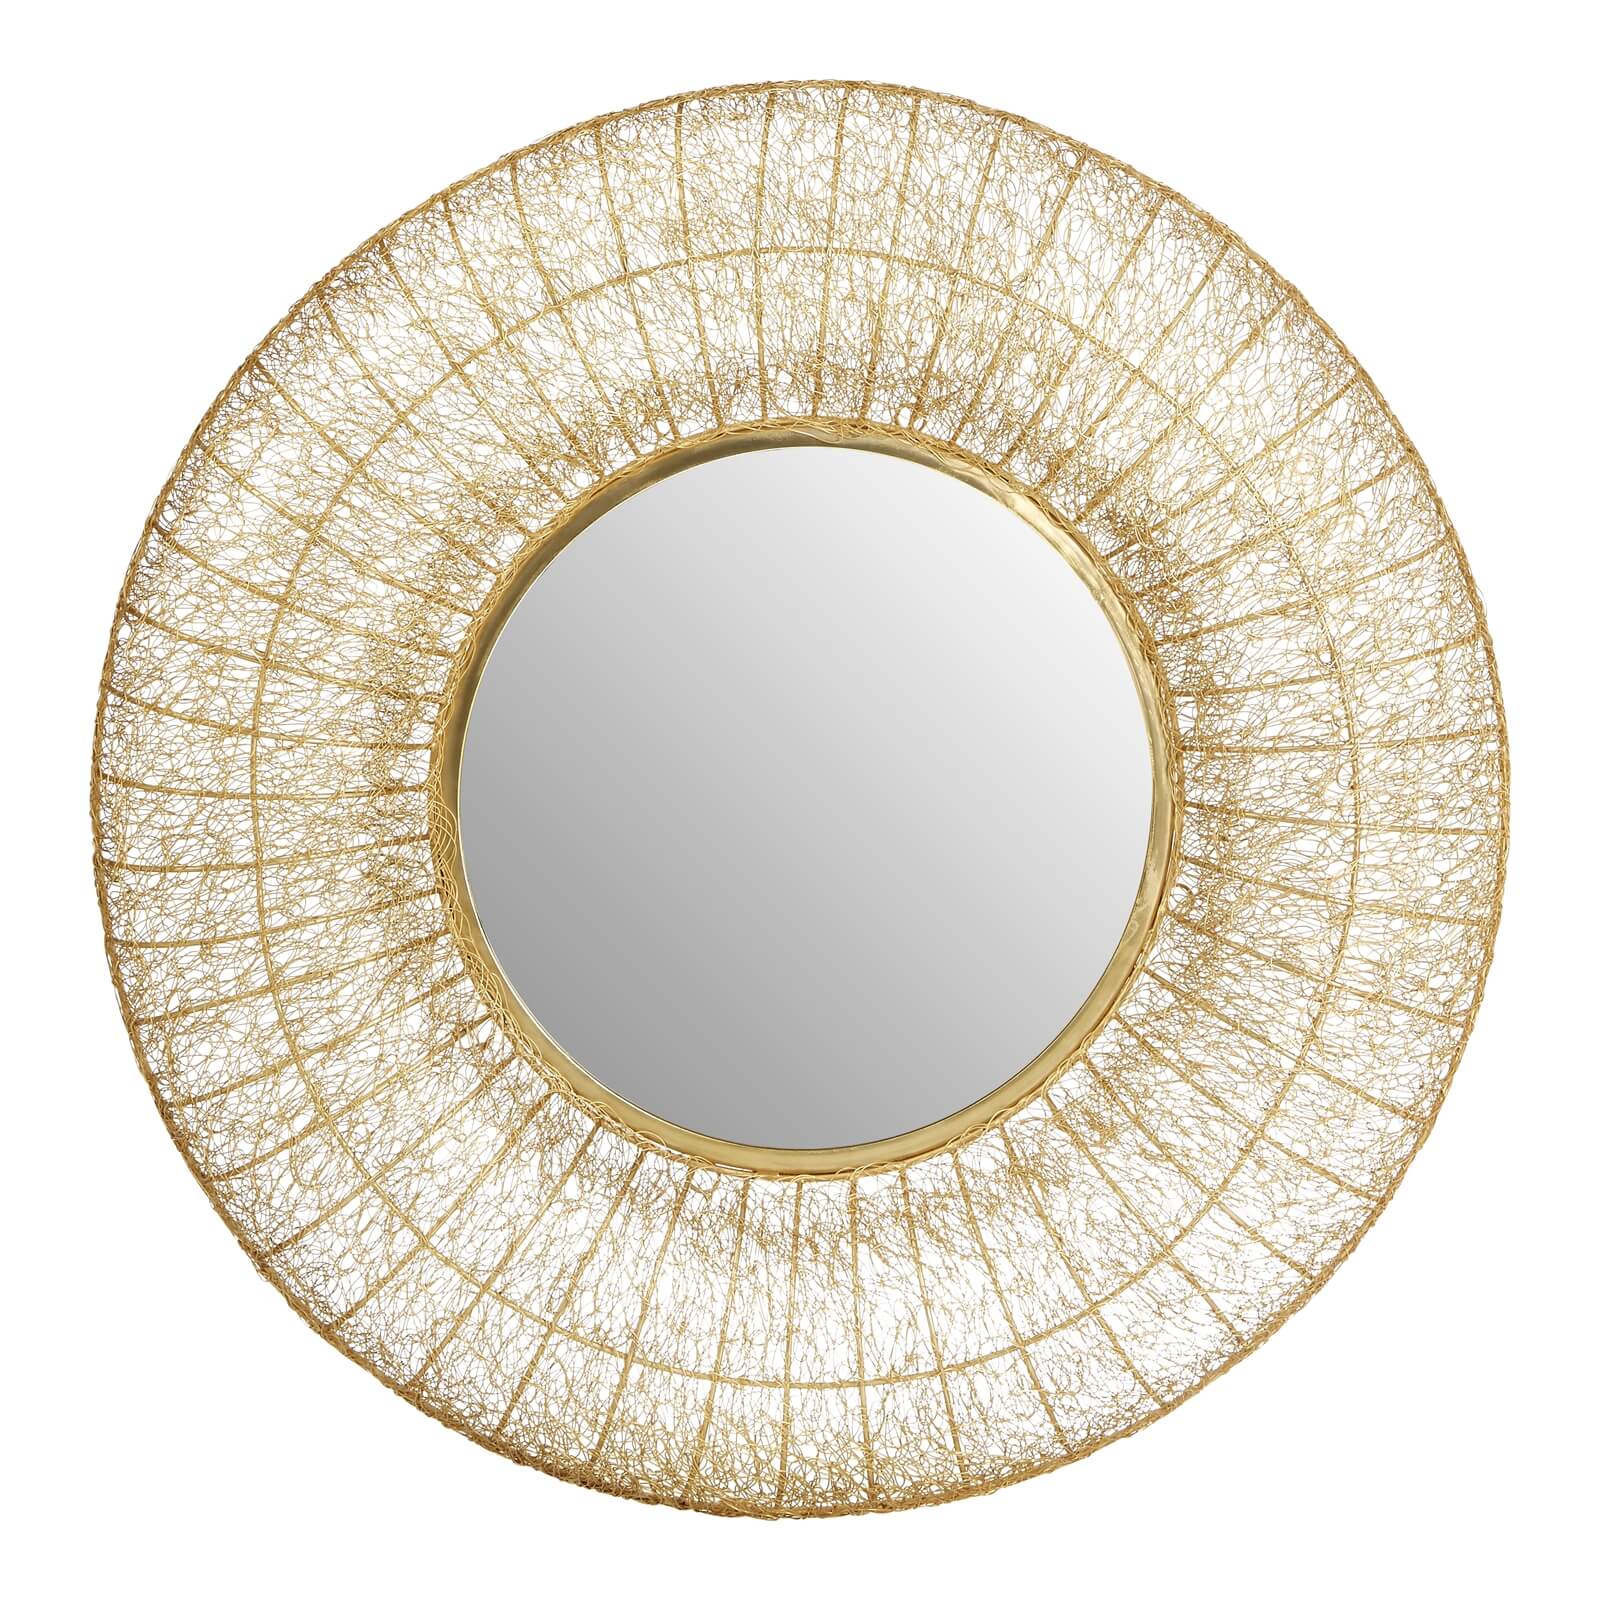 Temple Gold Wall Mirror